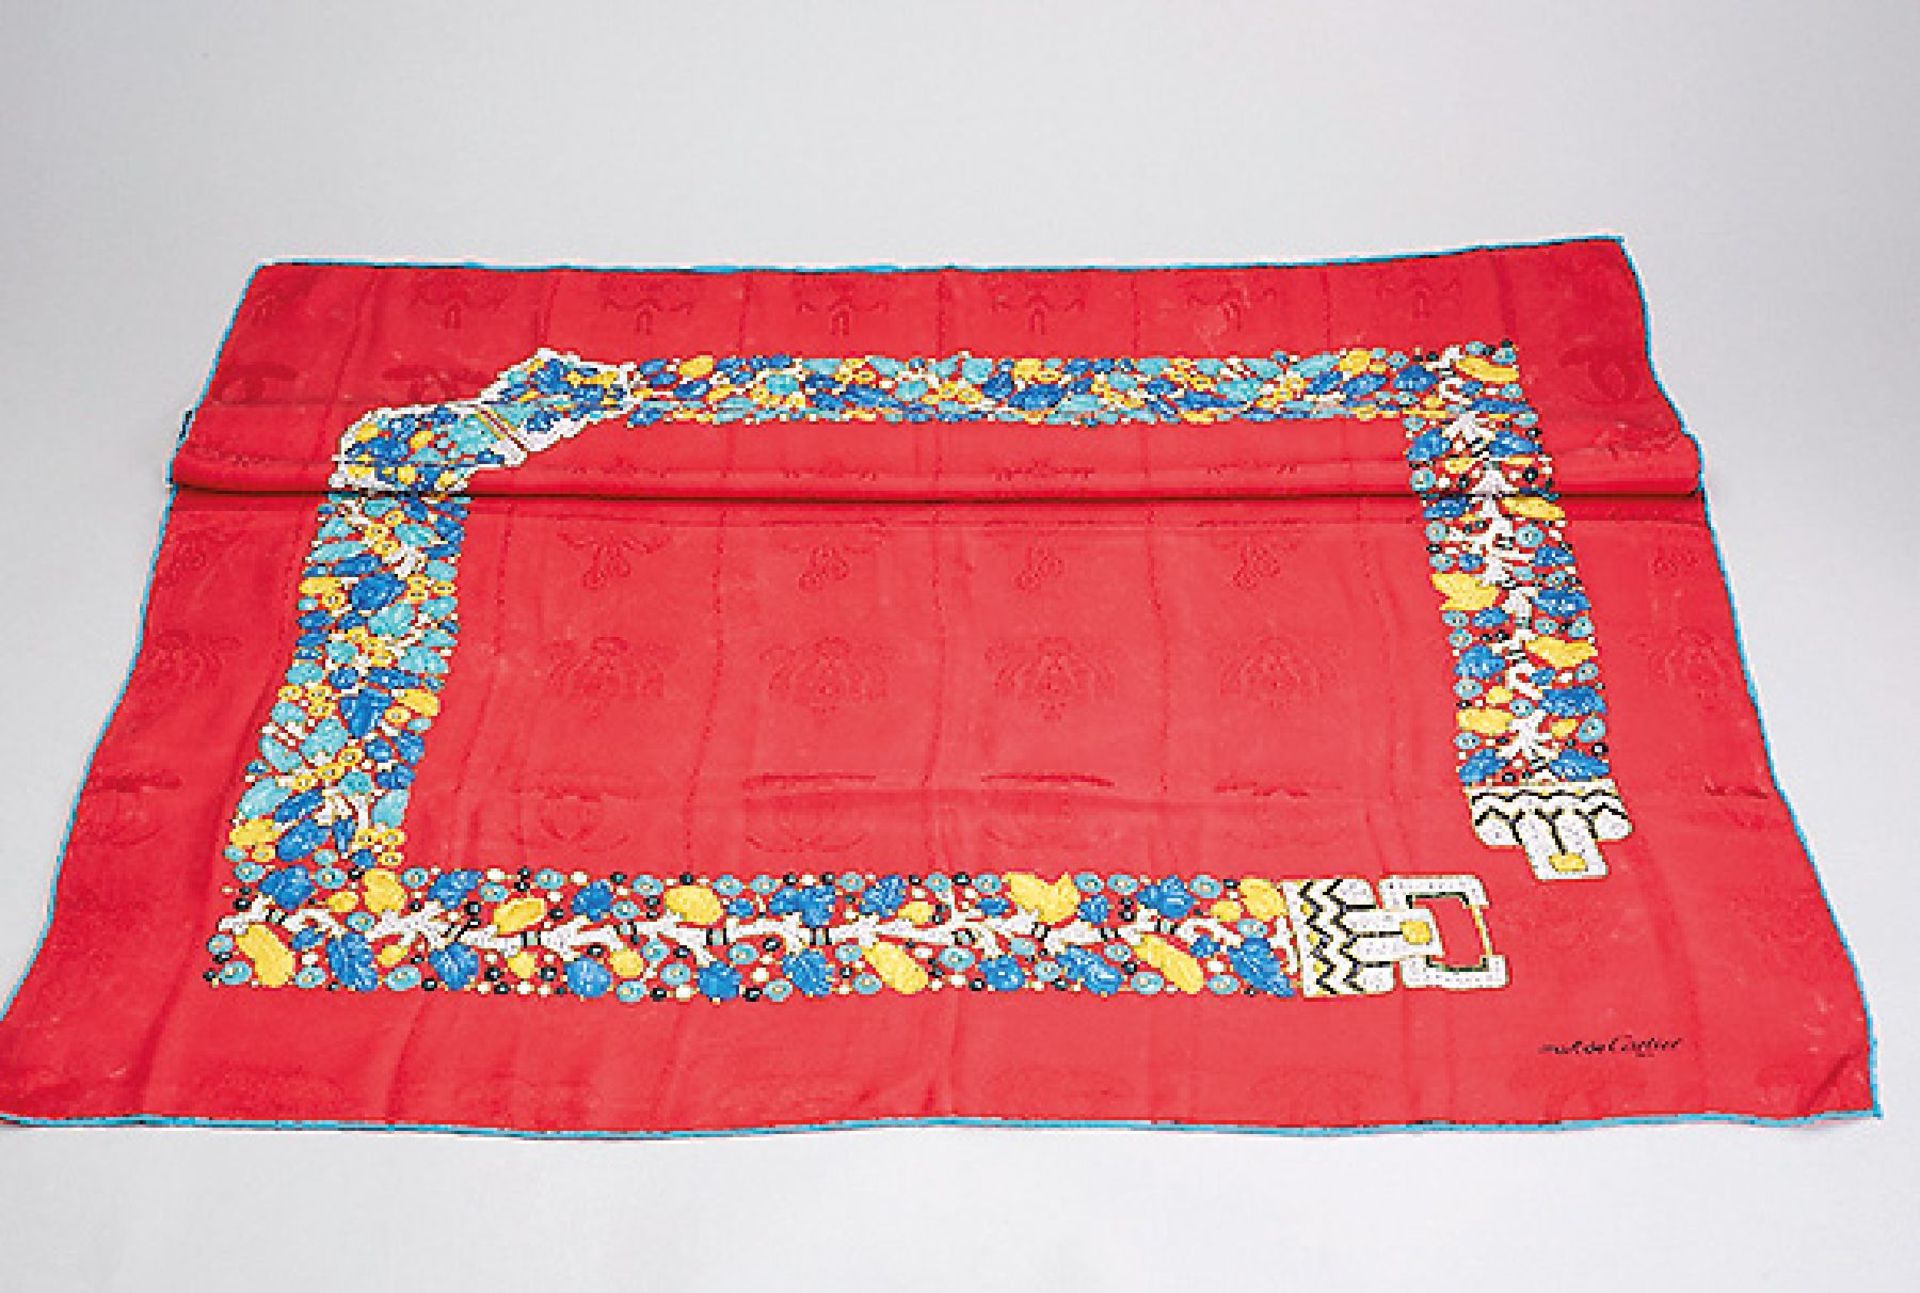 Must de CARTIER square, 100 % silk , Made inFrance, red faced with motifs in the form of jewellery